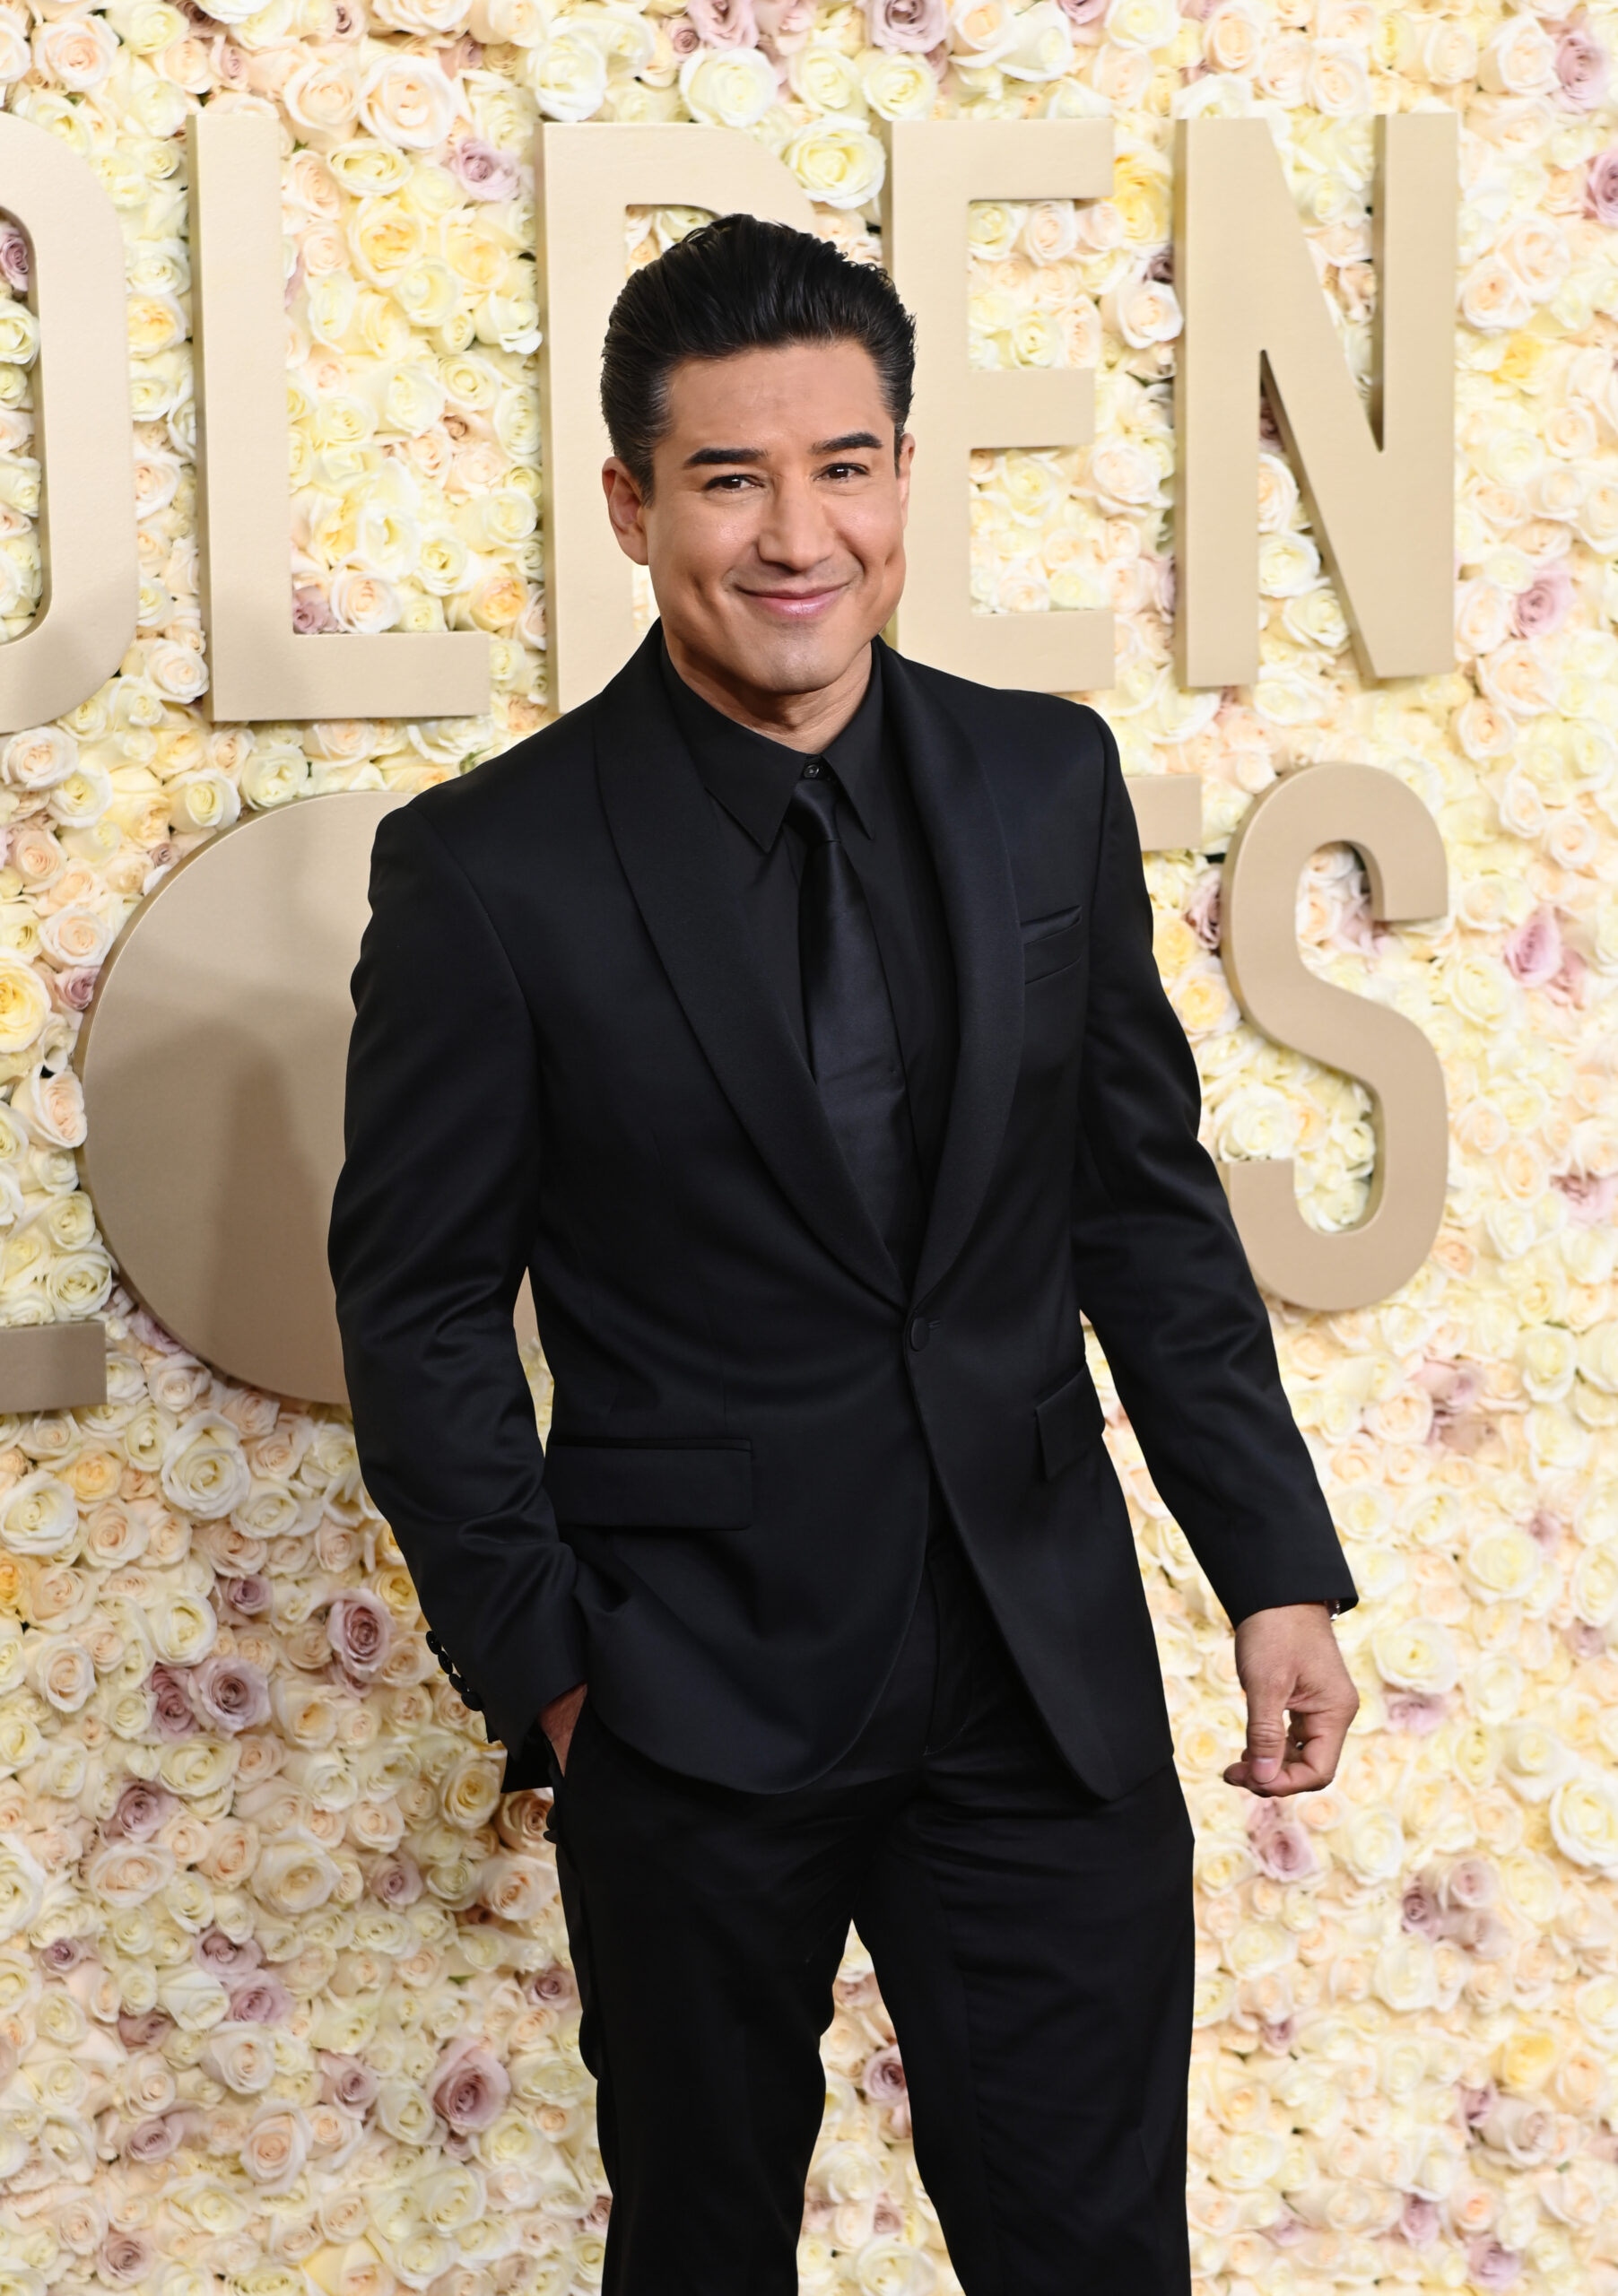 BEVERLY HILLS, CALIFORNIA - JANUARY 07: Mario Lopez attends the 81st Annual Golden Globe Awards at The Beverly Hilton on January 07, 2024 in Beverly Hills, California. (Photo by Jon Kopaloff/WireImage,)